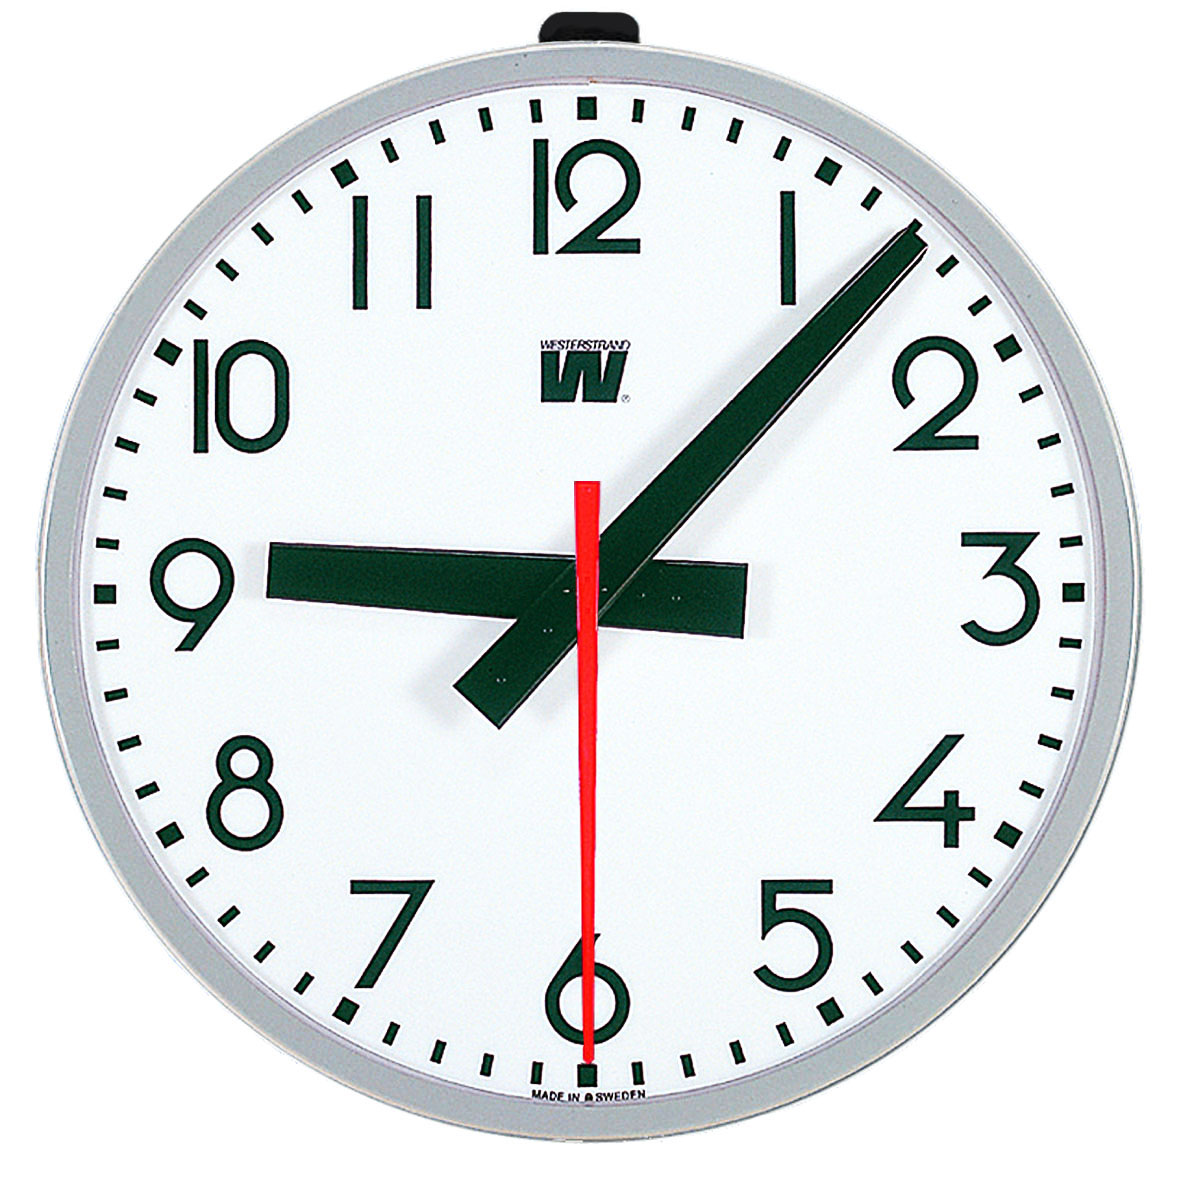 analogue-indoor-outdoor-clock-with-seconds-westerstrand